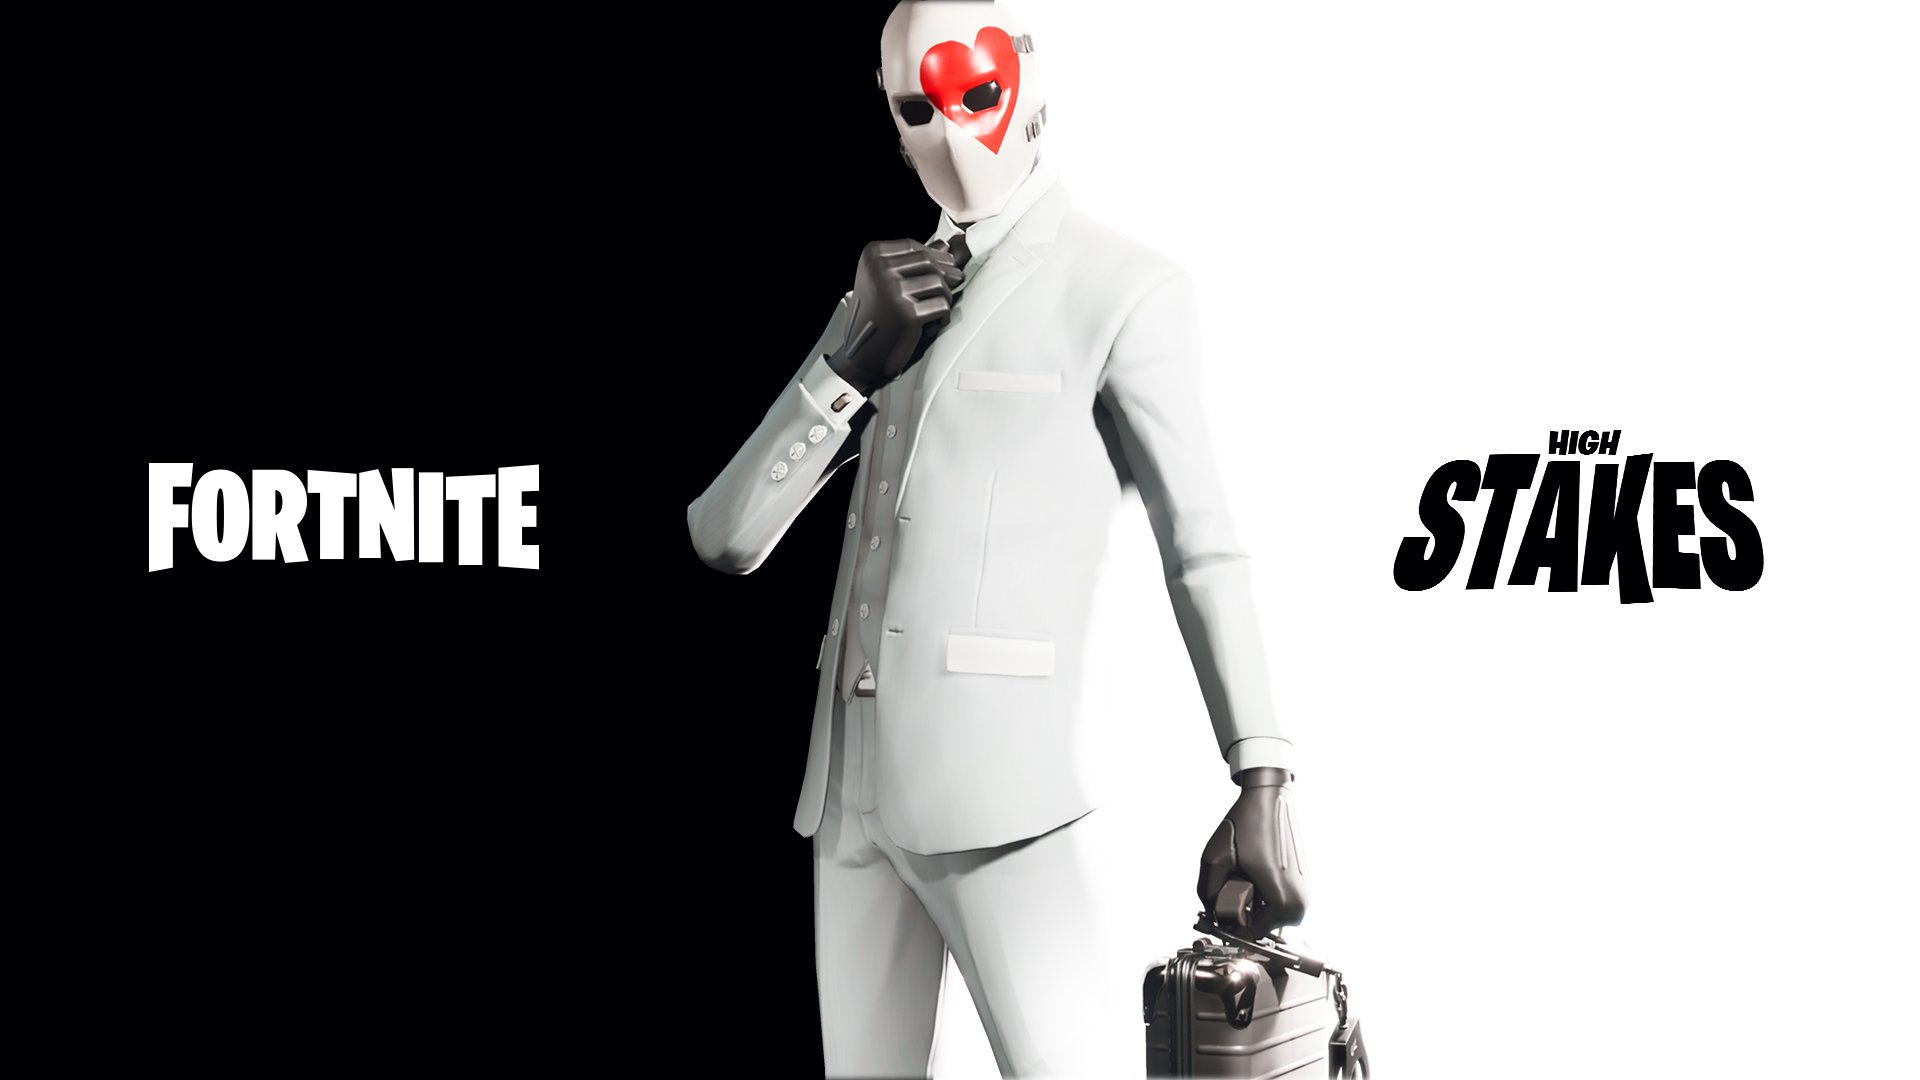 new high stakes event brings new ltm skin and challenges to fortnite battle royale next week fortnite news and statistics ss1 - new ltm in fortnite today